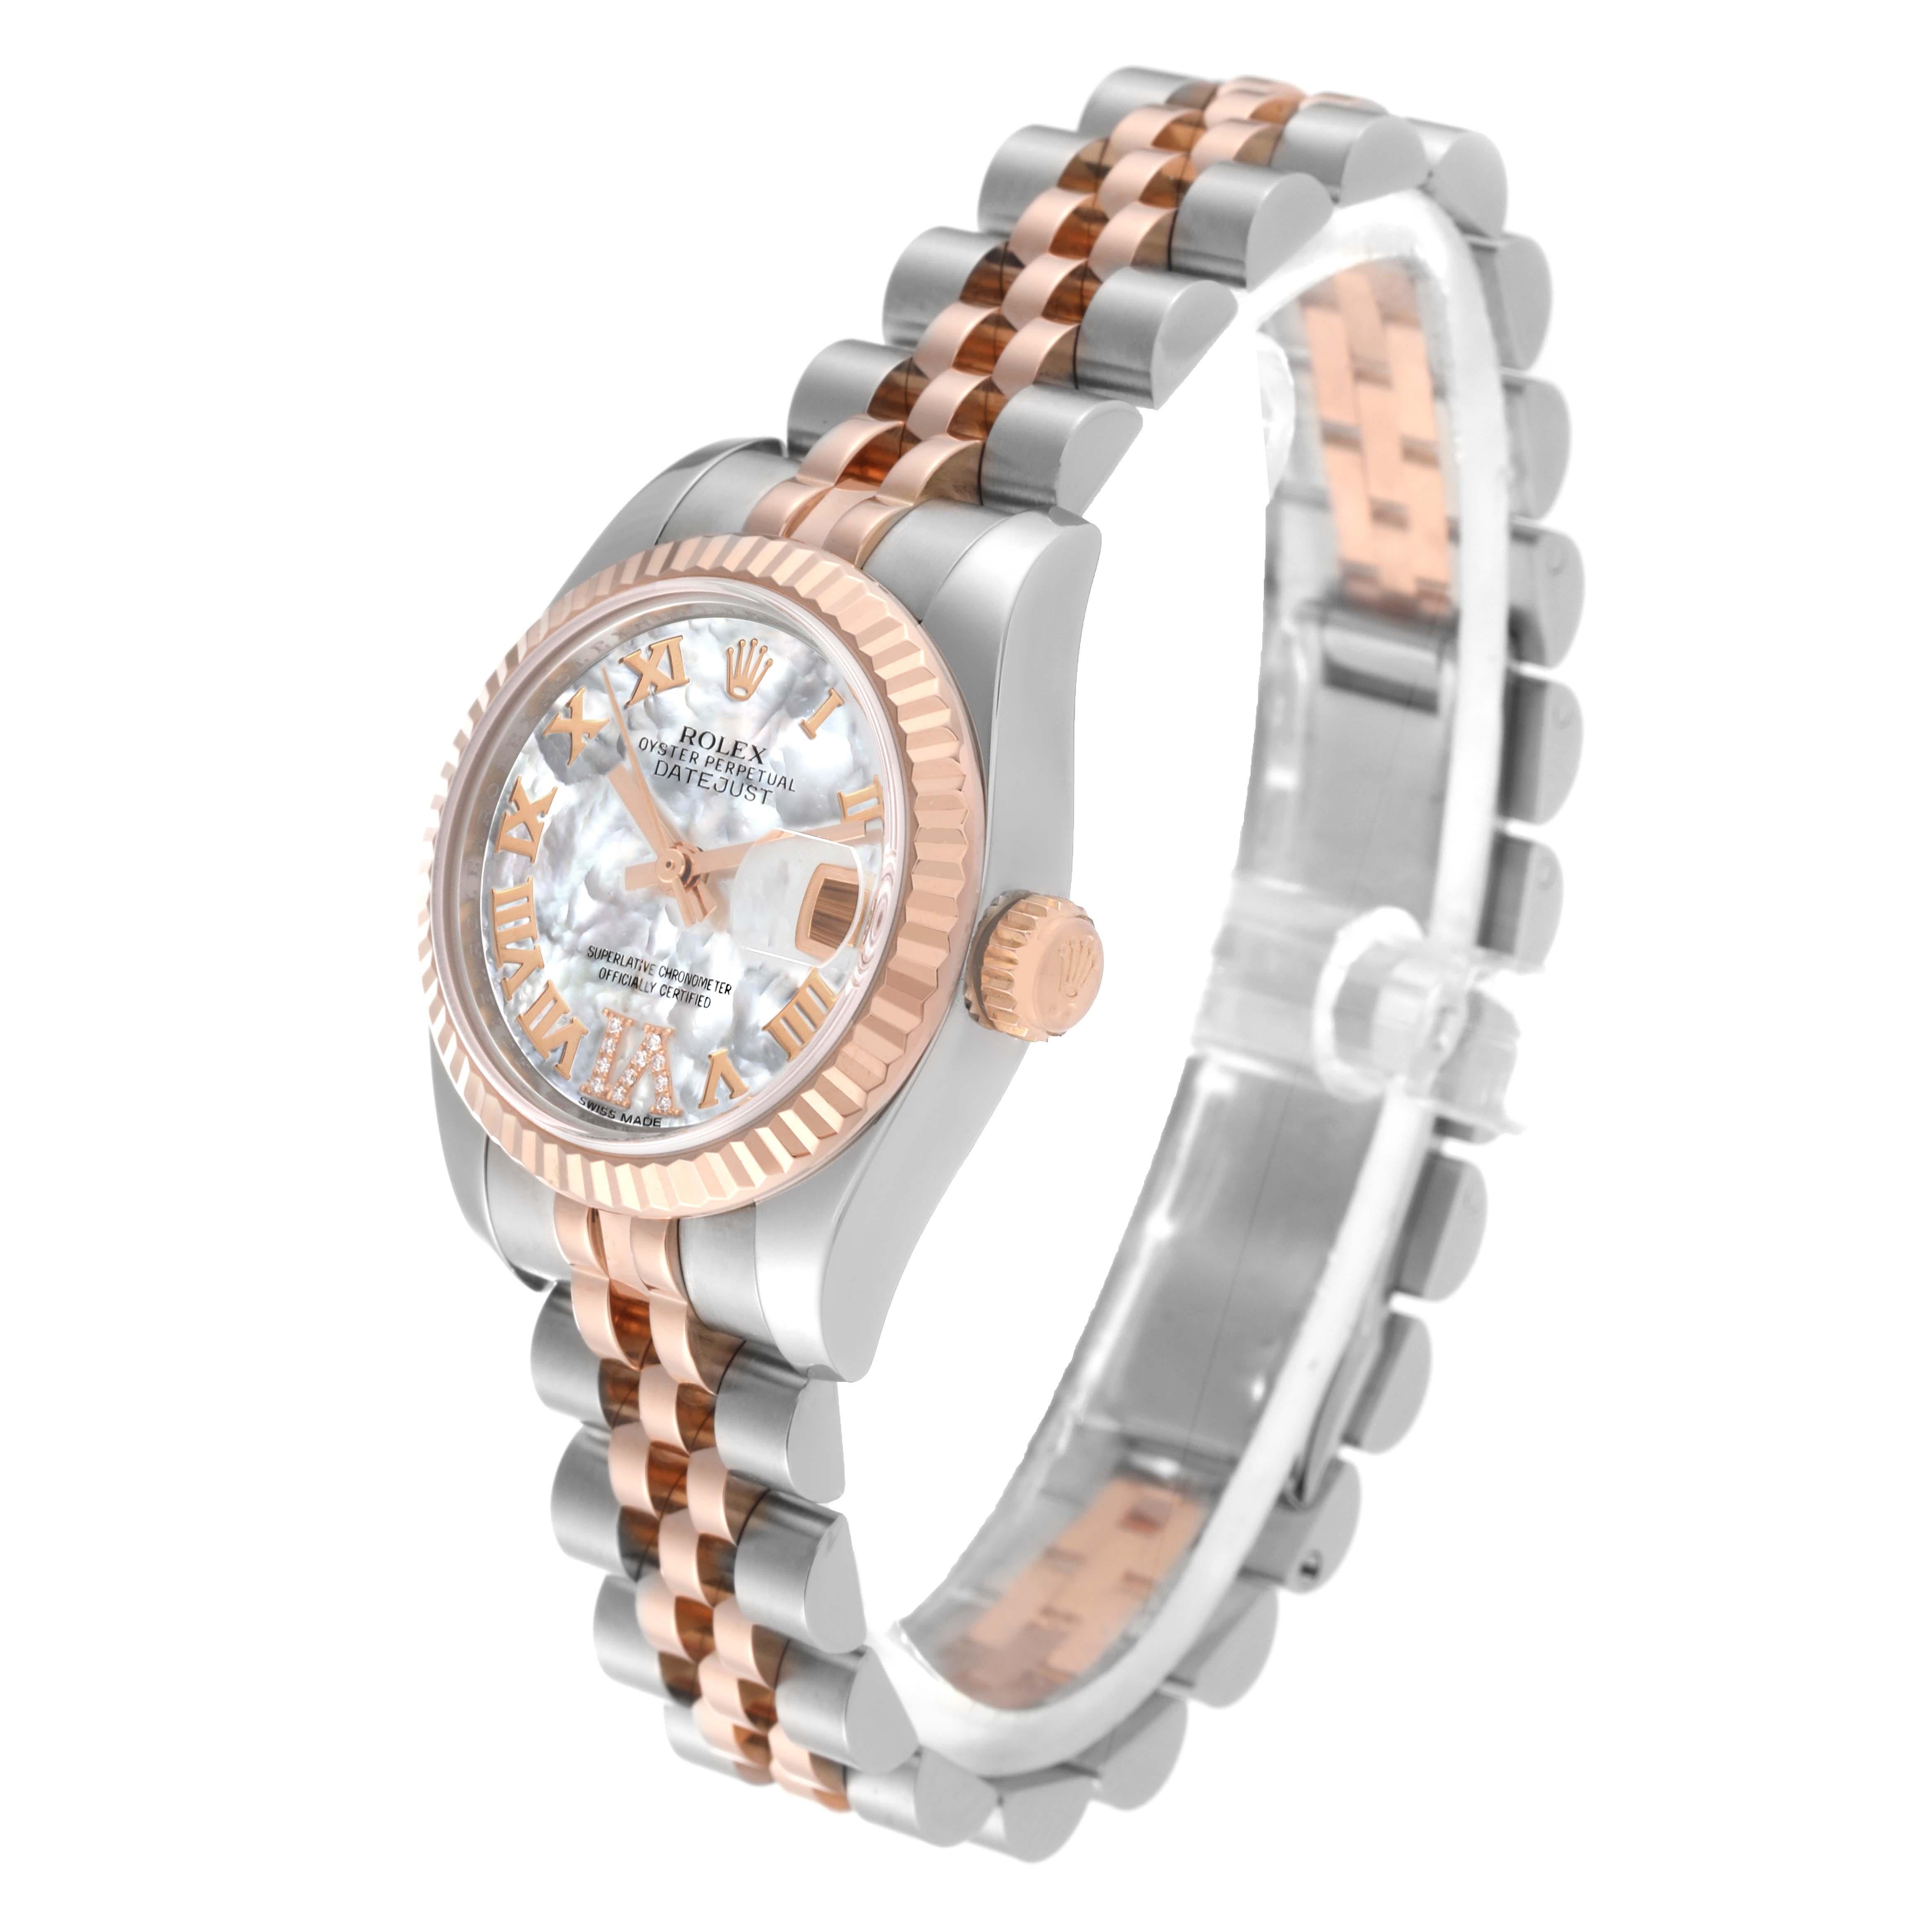 Rolex Datejust Steel Rose Gold Mother of Pearl Diamond Dial Ladies Watch 179171 For Sale 7